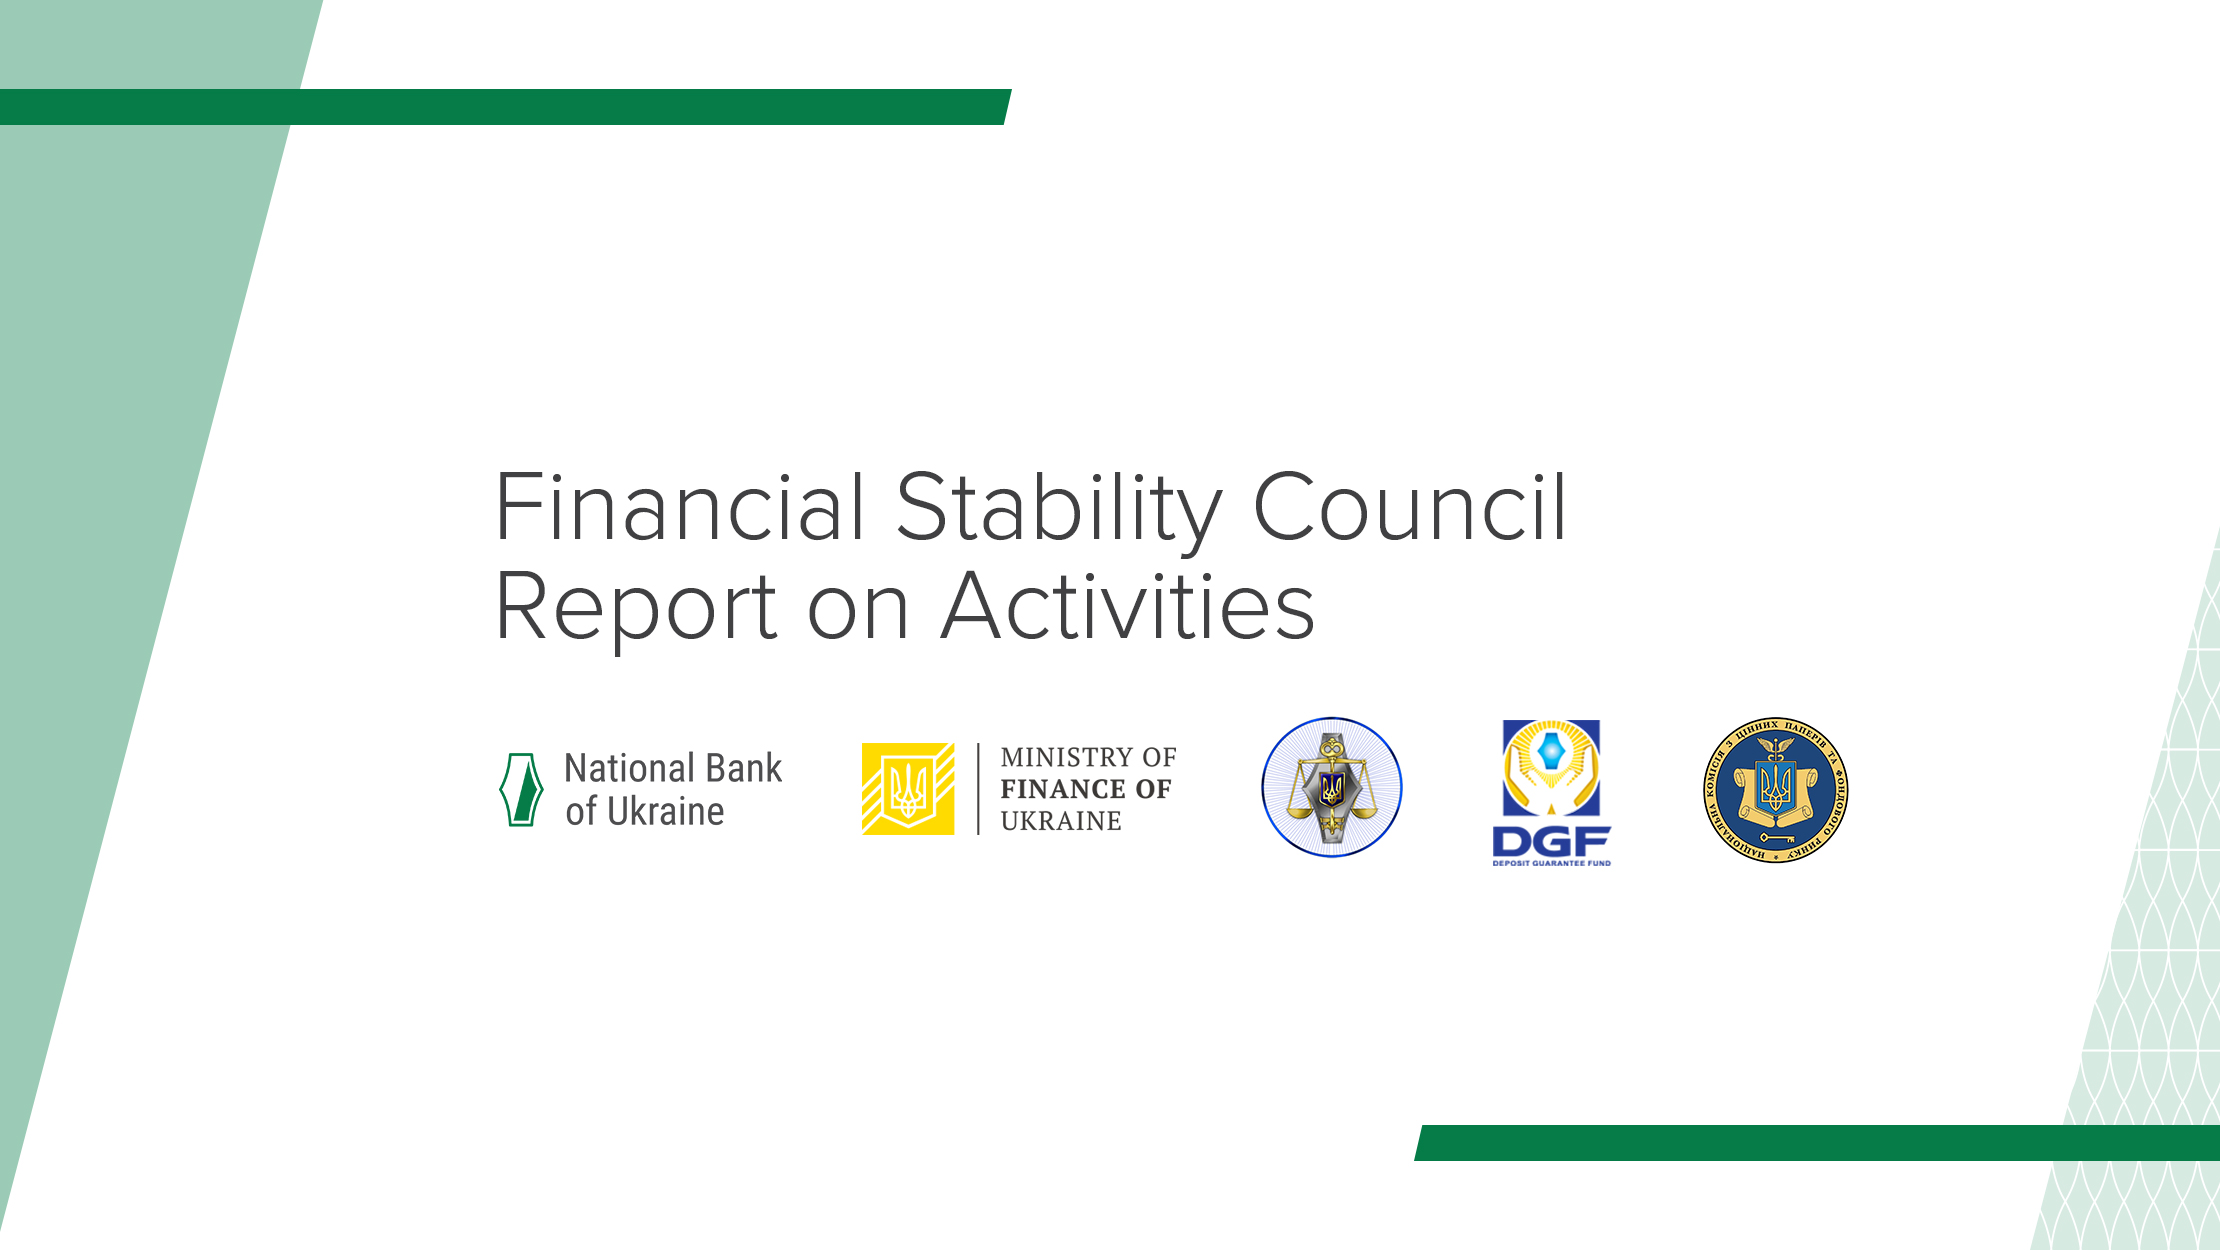 NBU Publishes Fourth Annual Report on Financial Stability Council’s Activities